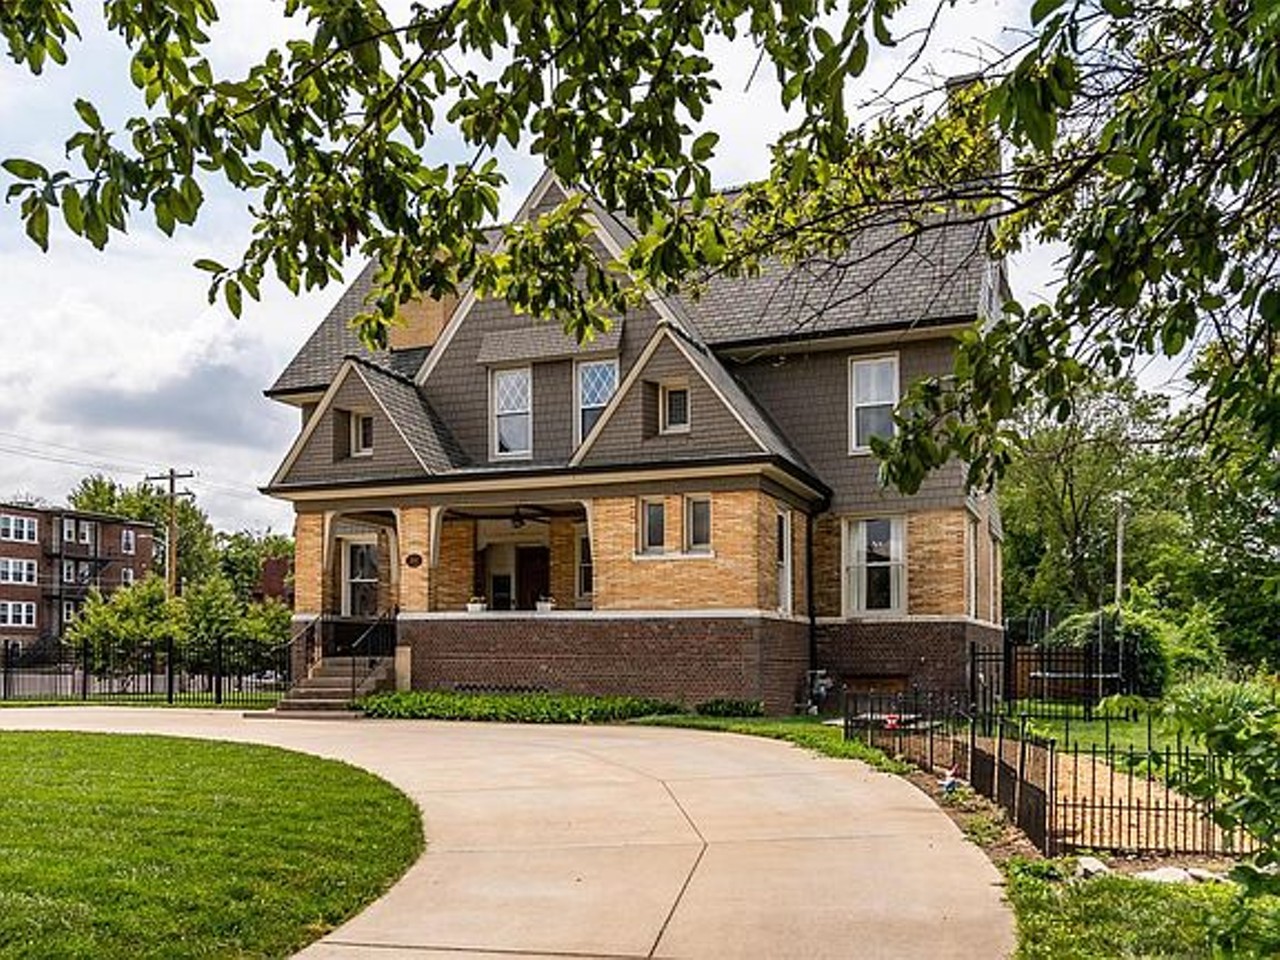 This Beautiful Home Was Designed by the Same Guy Who Designed Union Station [PHOTOS]